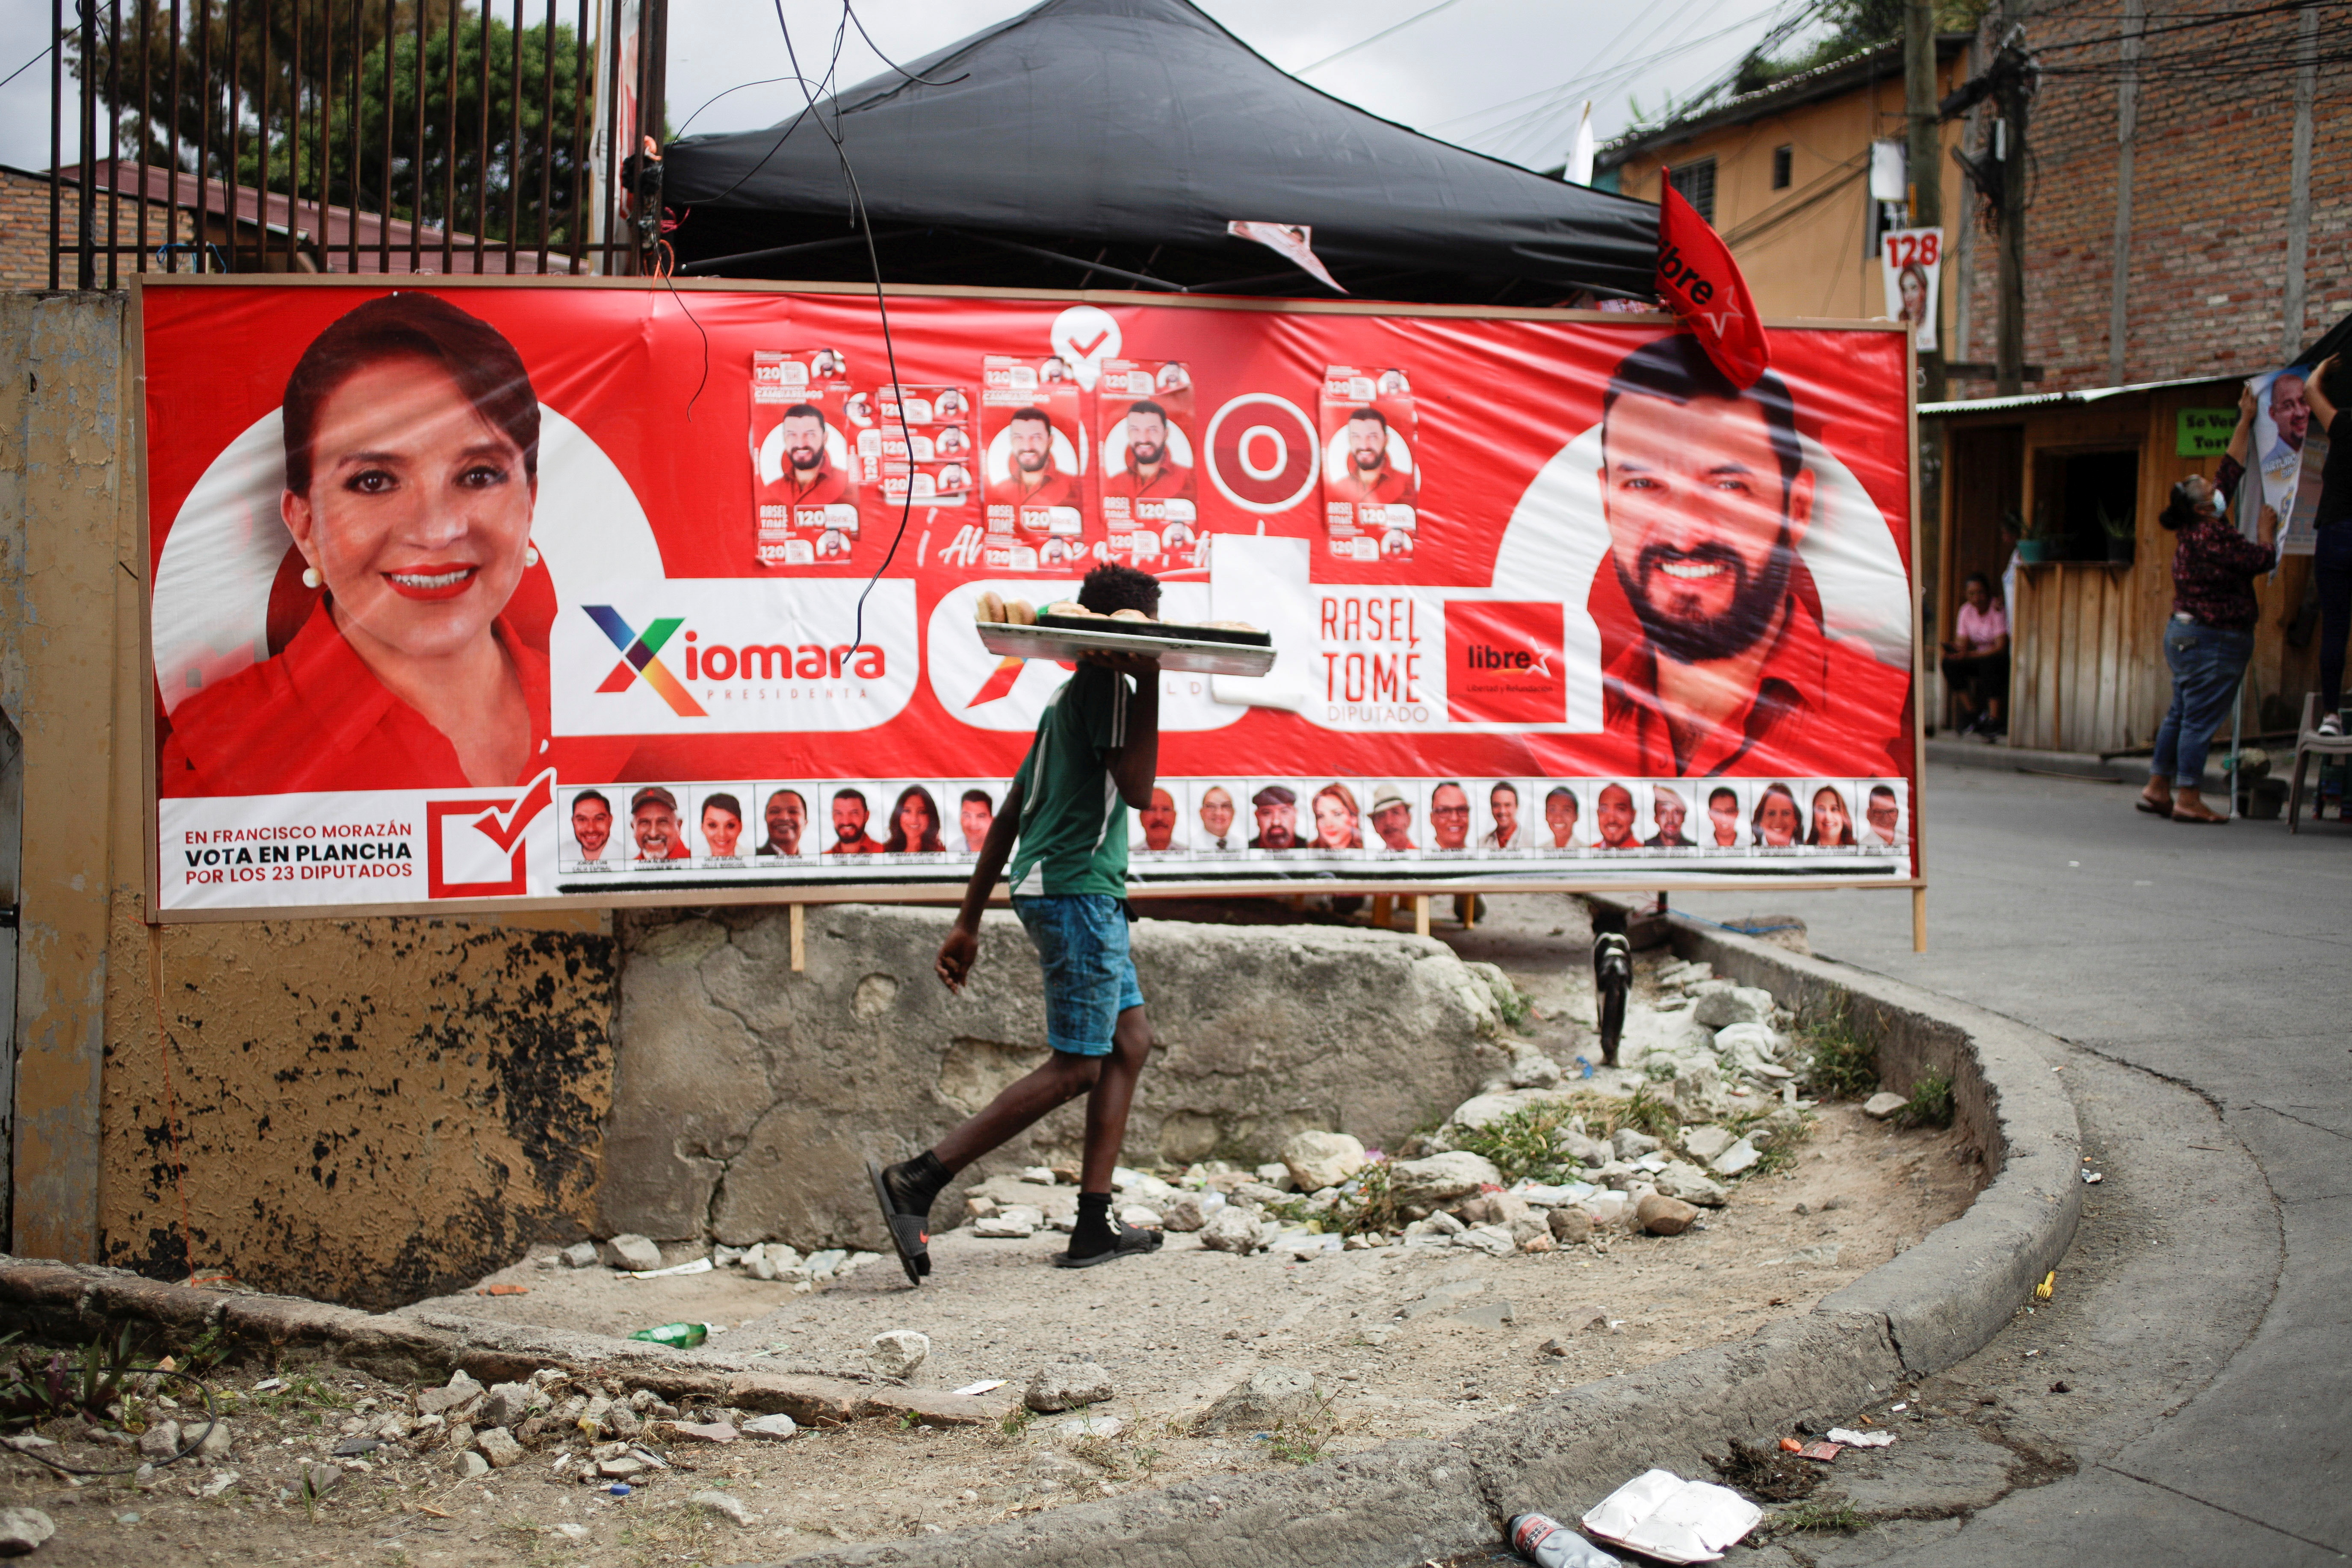 A young man passes in front of a banner of the Libre Party presidential candidate Xiomara Castro ahead of the November 28 general election in Tegucigalpa, Honduras November 27, 2021. REUTERS/Fredy Rodriguez/File Photo